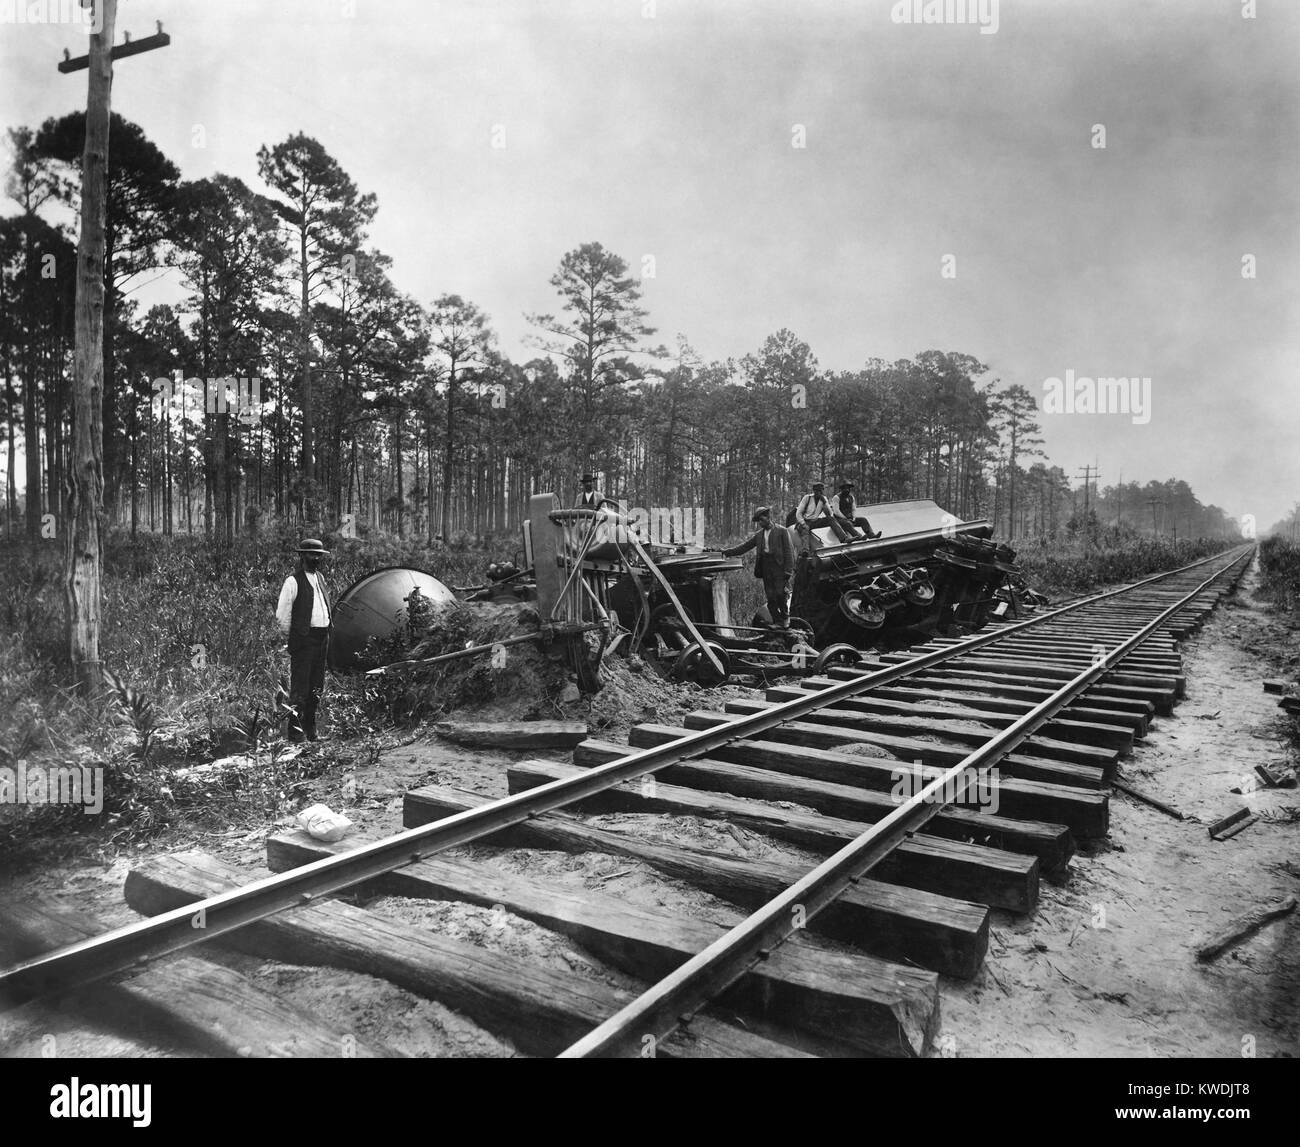 Locomotive derailed on Ten Mile Hill by the Charleston earthquake of August 31, 1886 (BSLOC 2017 17 59) Stock Photo